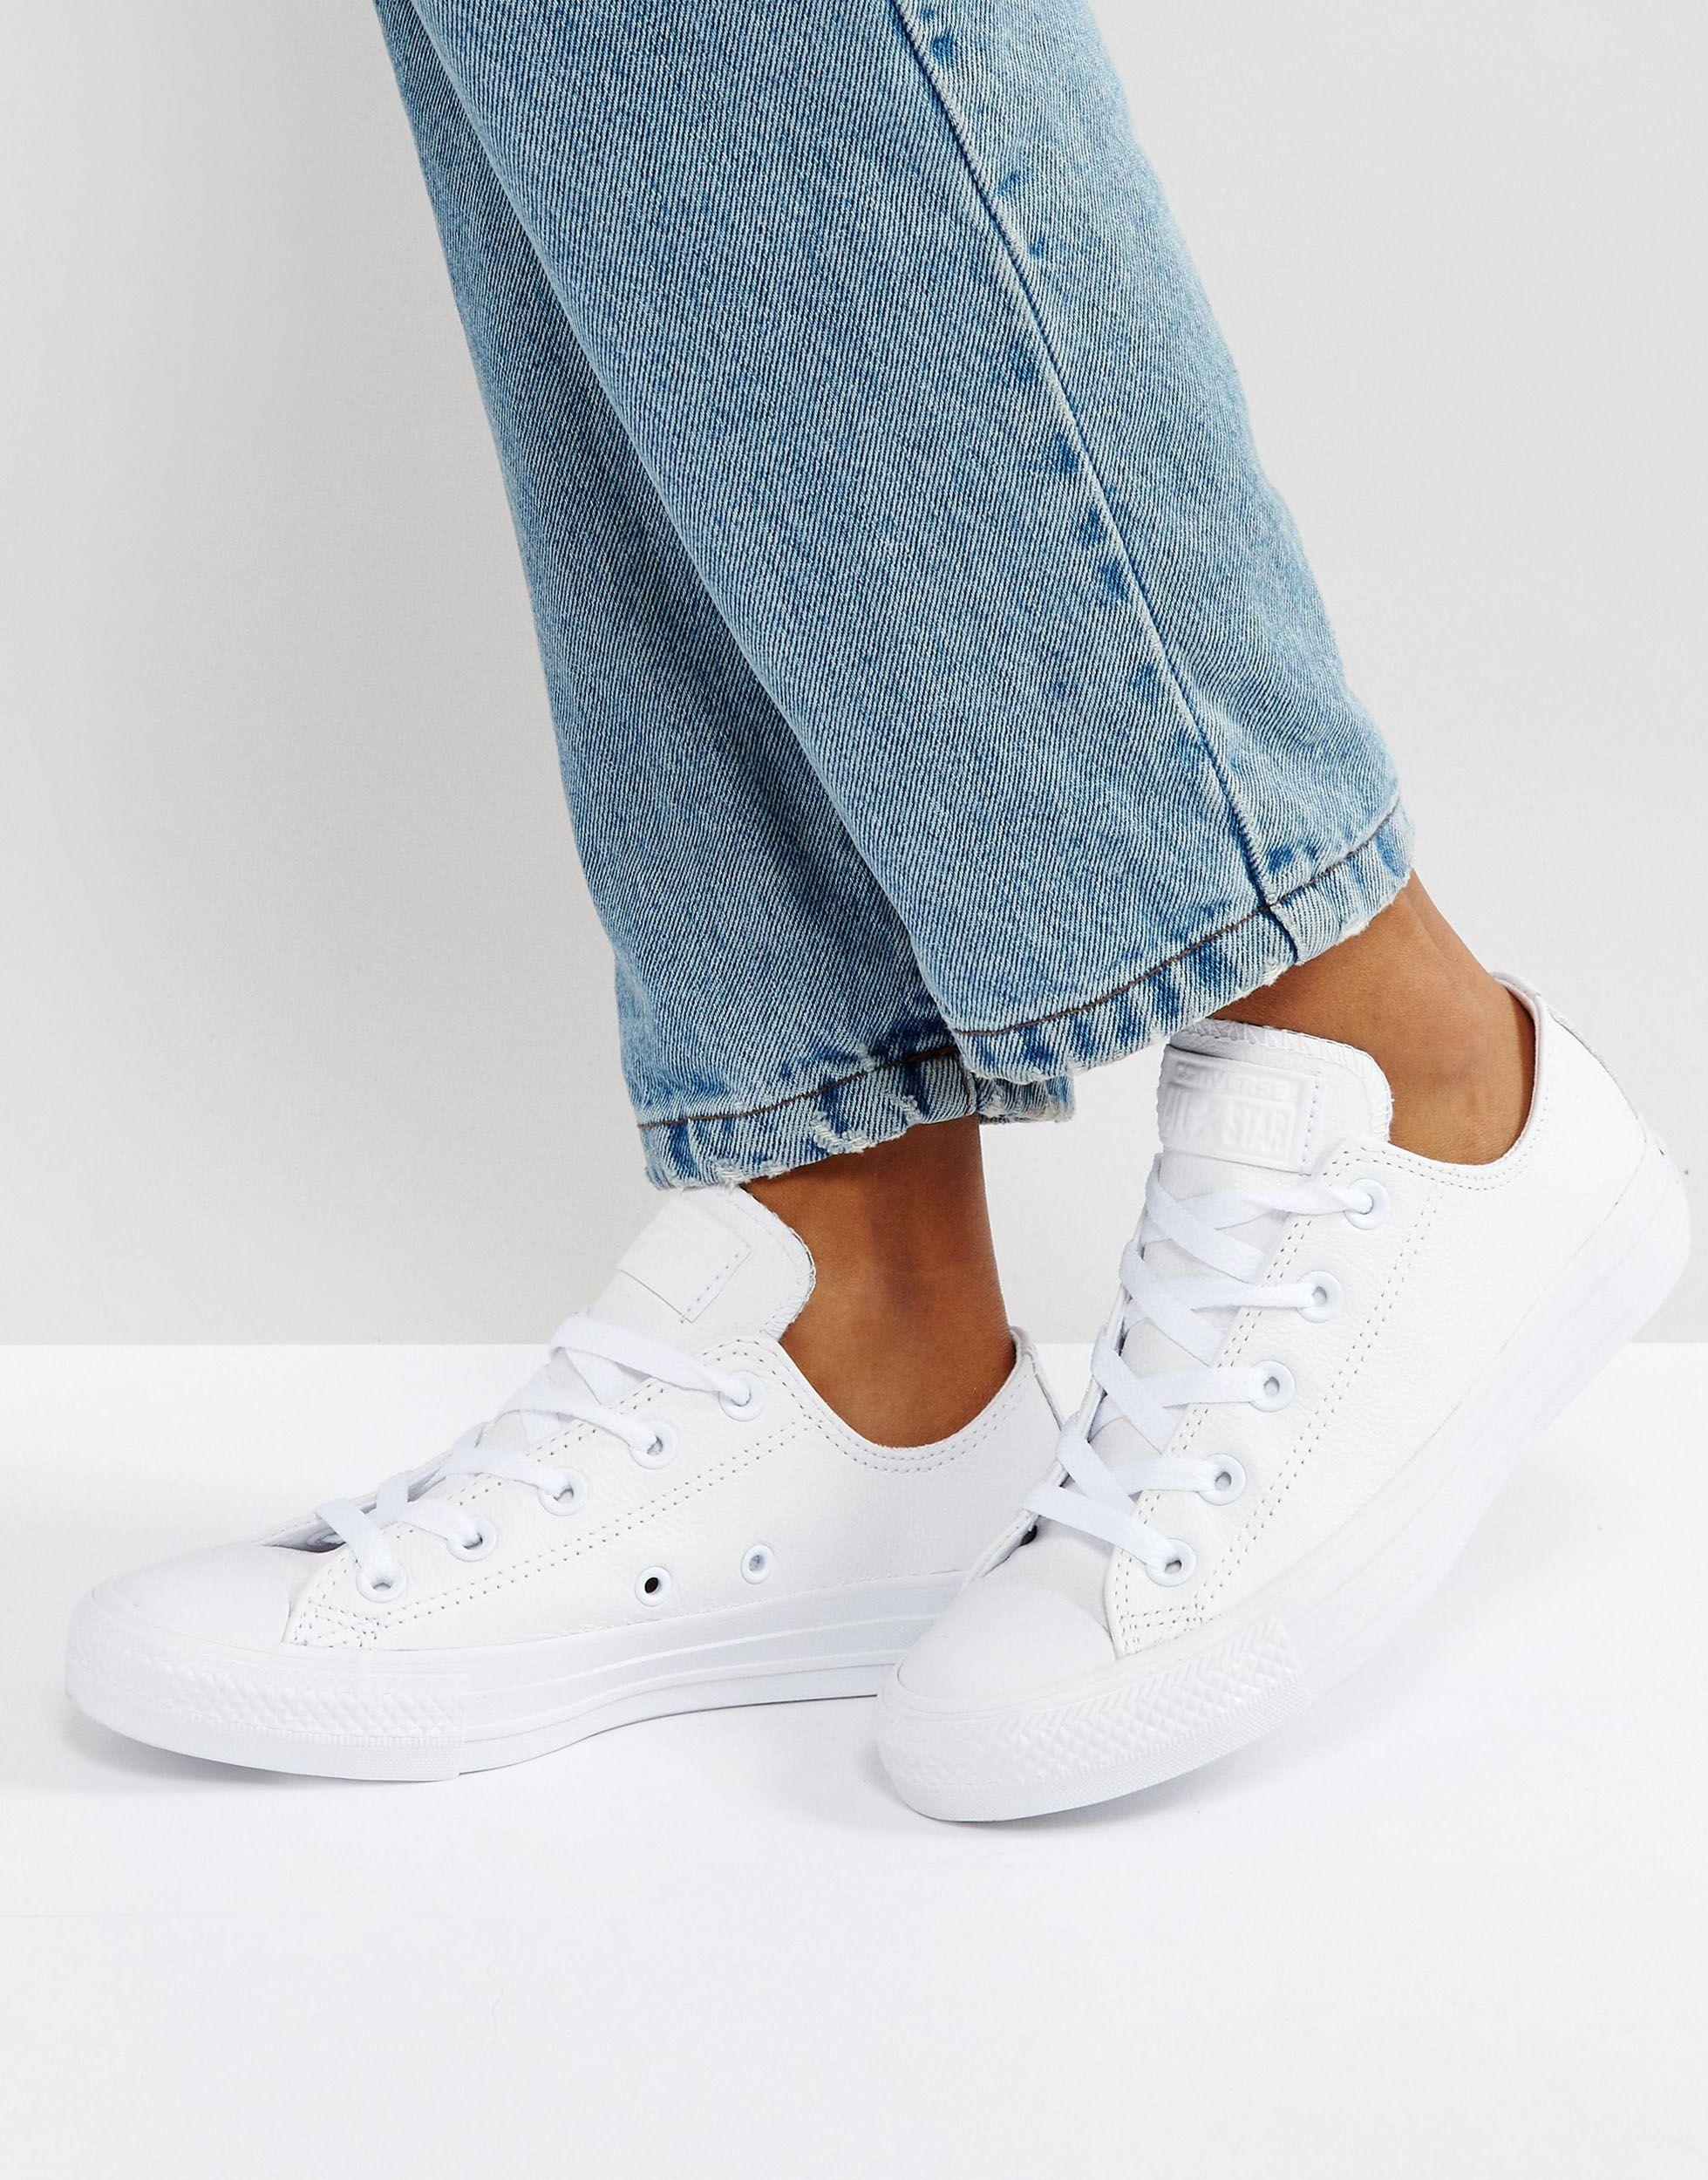 Converse Taylor Ox Leather Monochrome Sneakers in | Lyst